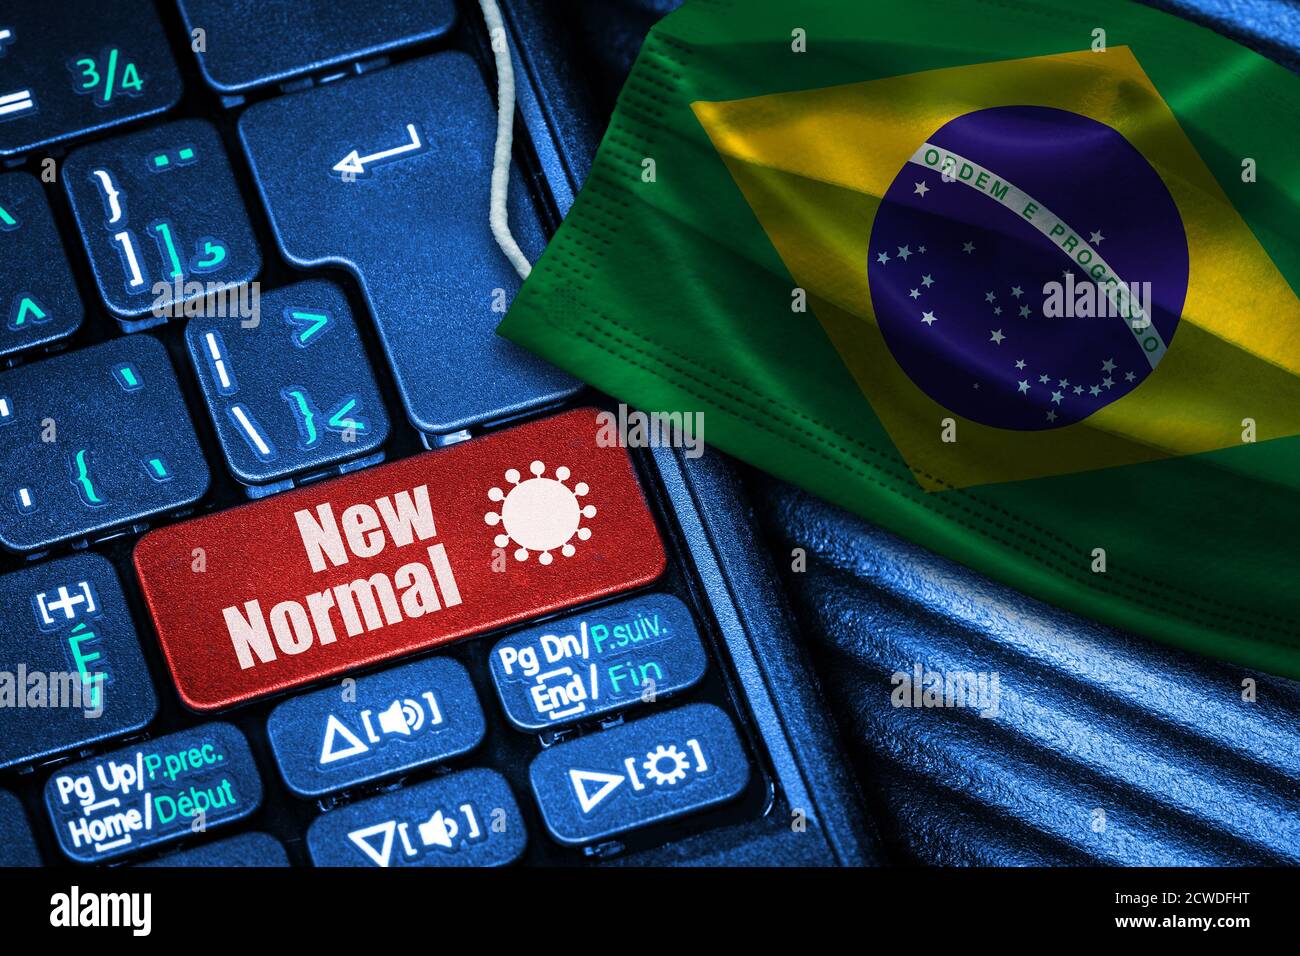 Concept of New Normal in Brazil during Covid-19 with computer keyboard red button text and face mask showing Brazilian Flag. Stock Photo